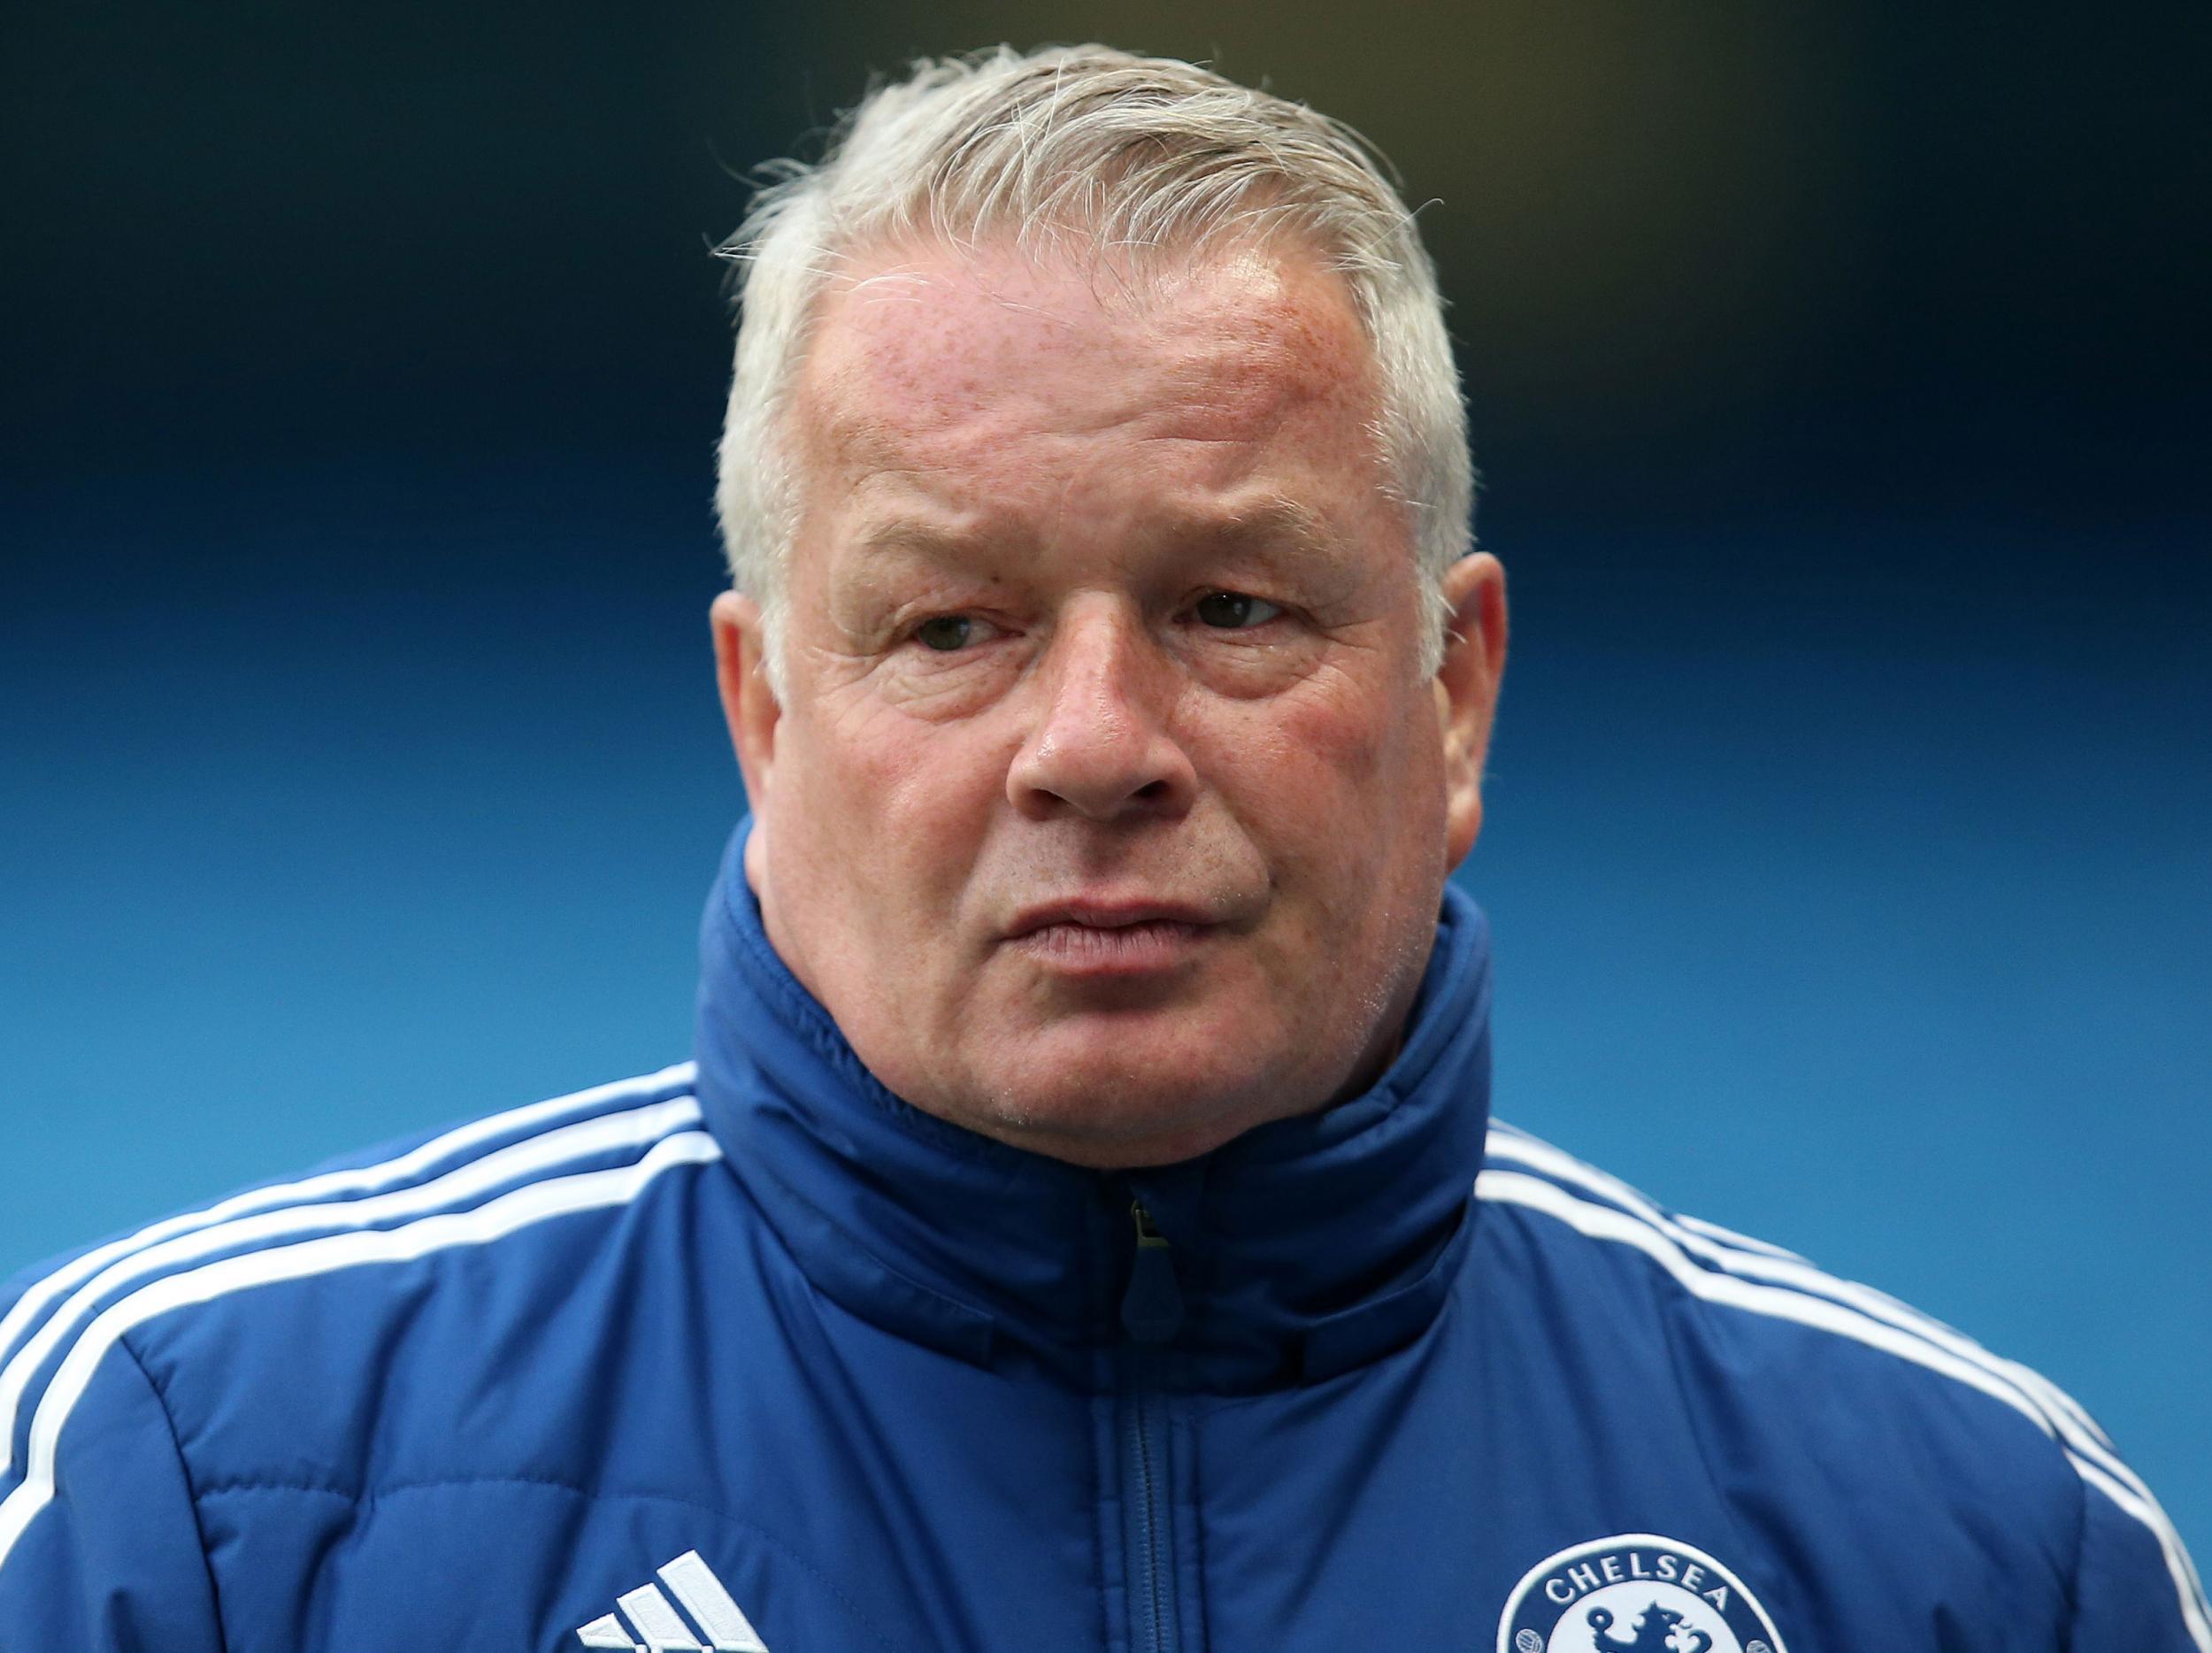 Dermot Drummy dead: Former Chelsea coach and Crawley manager dies aged 56